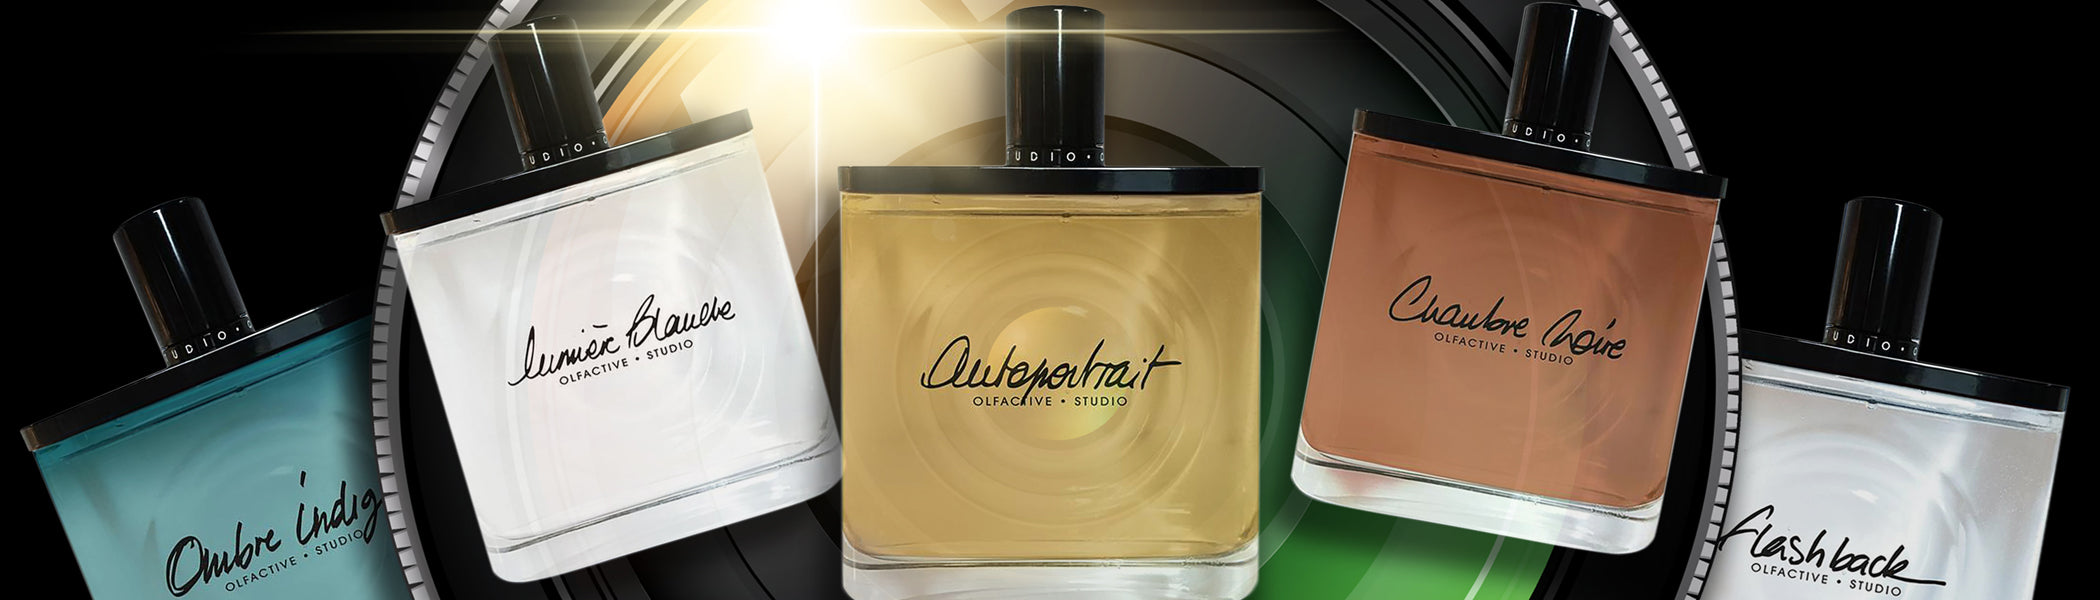 OLFACTIVE PERFUMES COLLECTION | NEVERABORE.COM